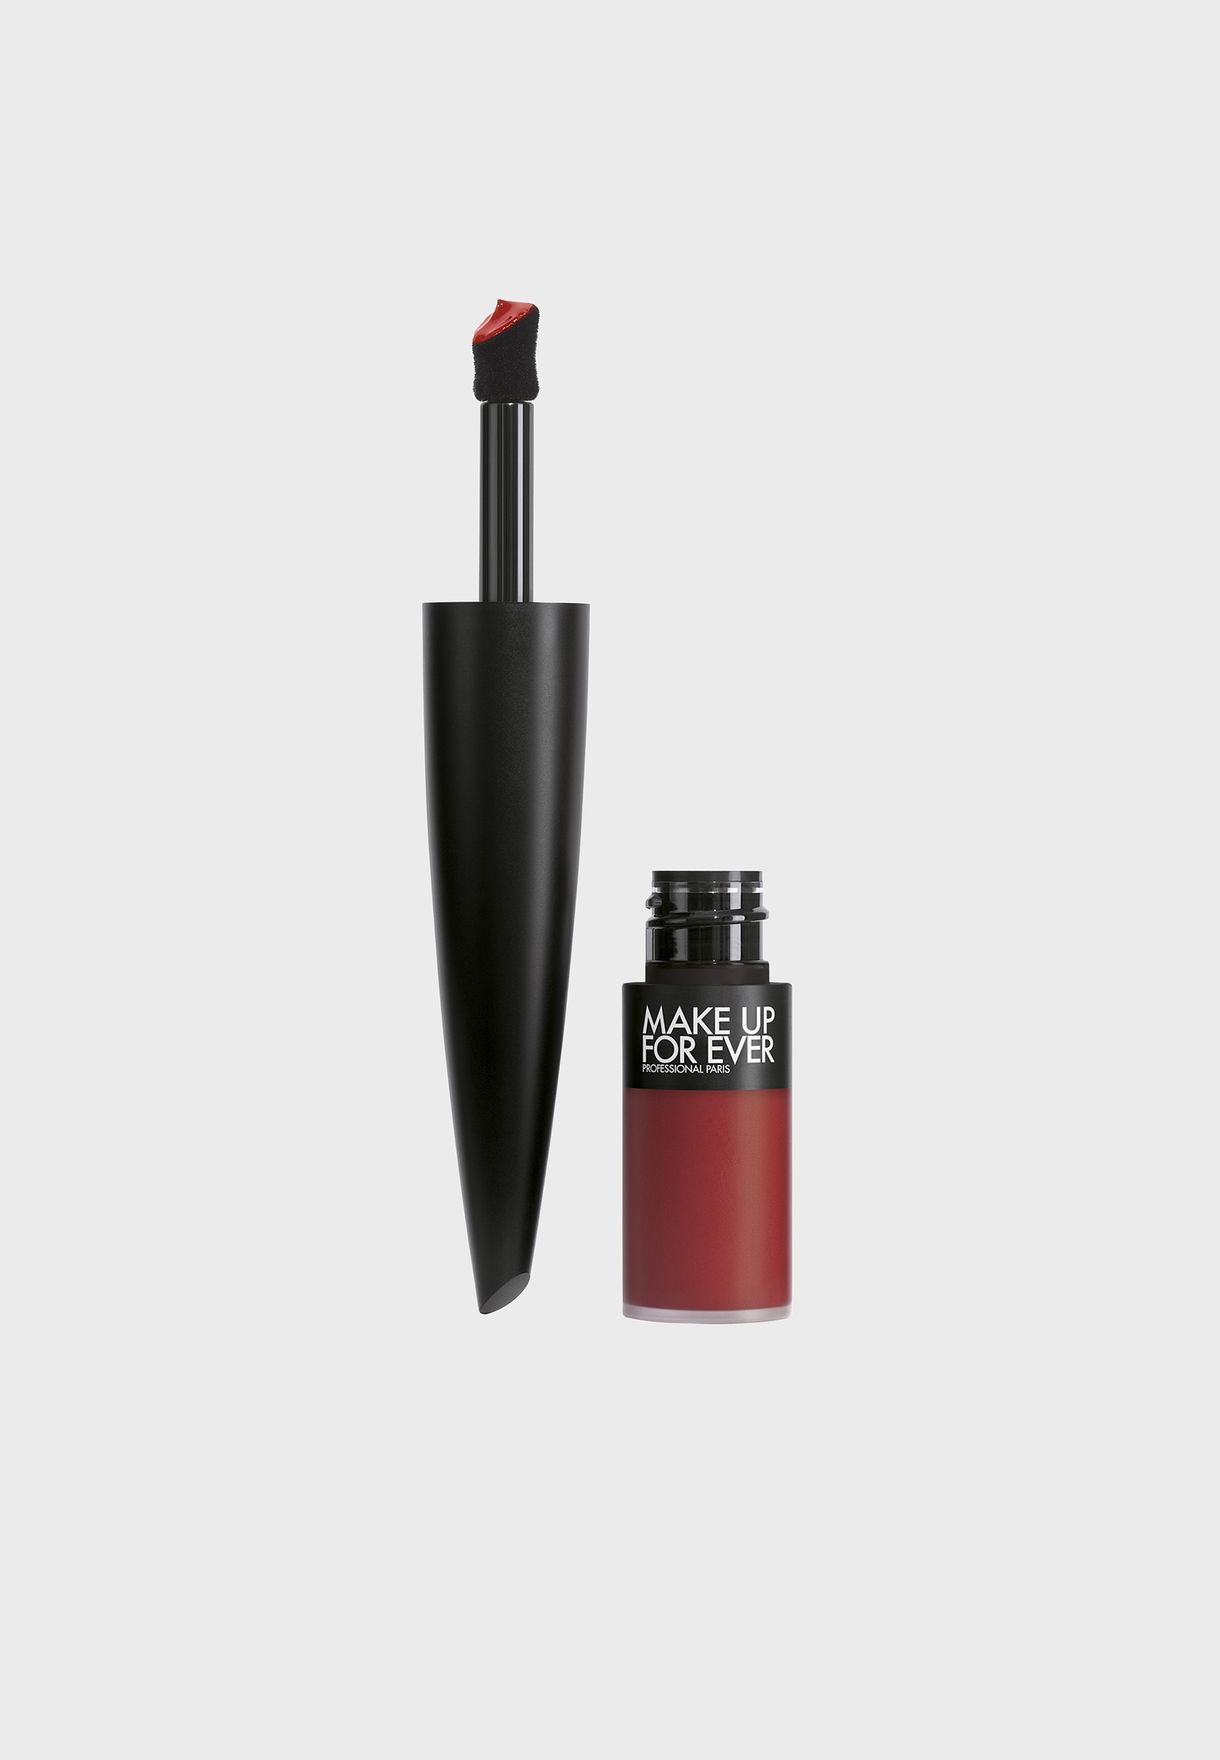 Rouge Artist For Ever Matte Lipstick - 402 - Constantly On Fire